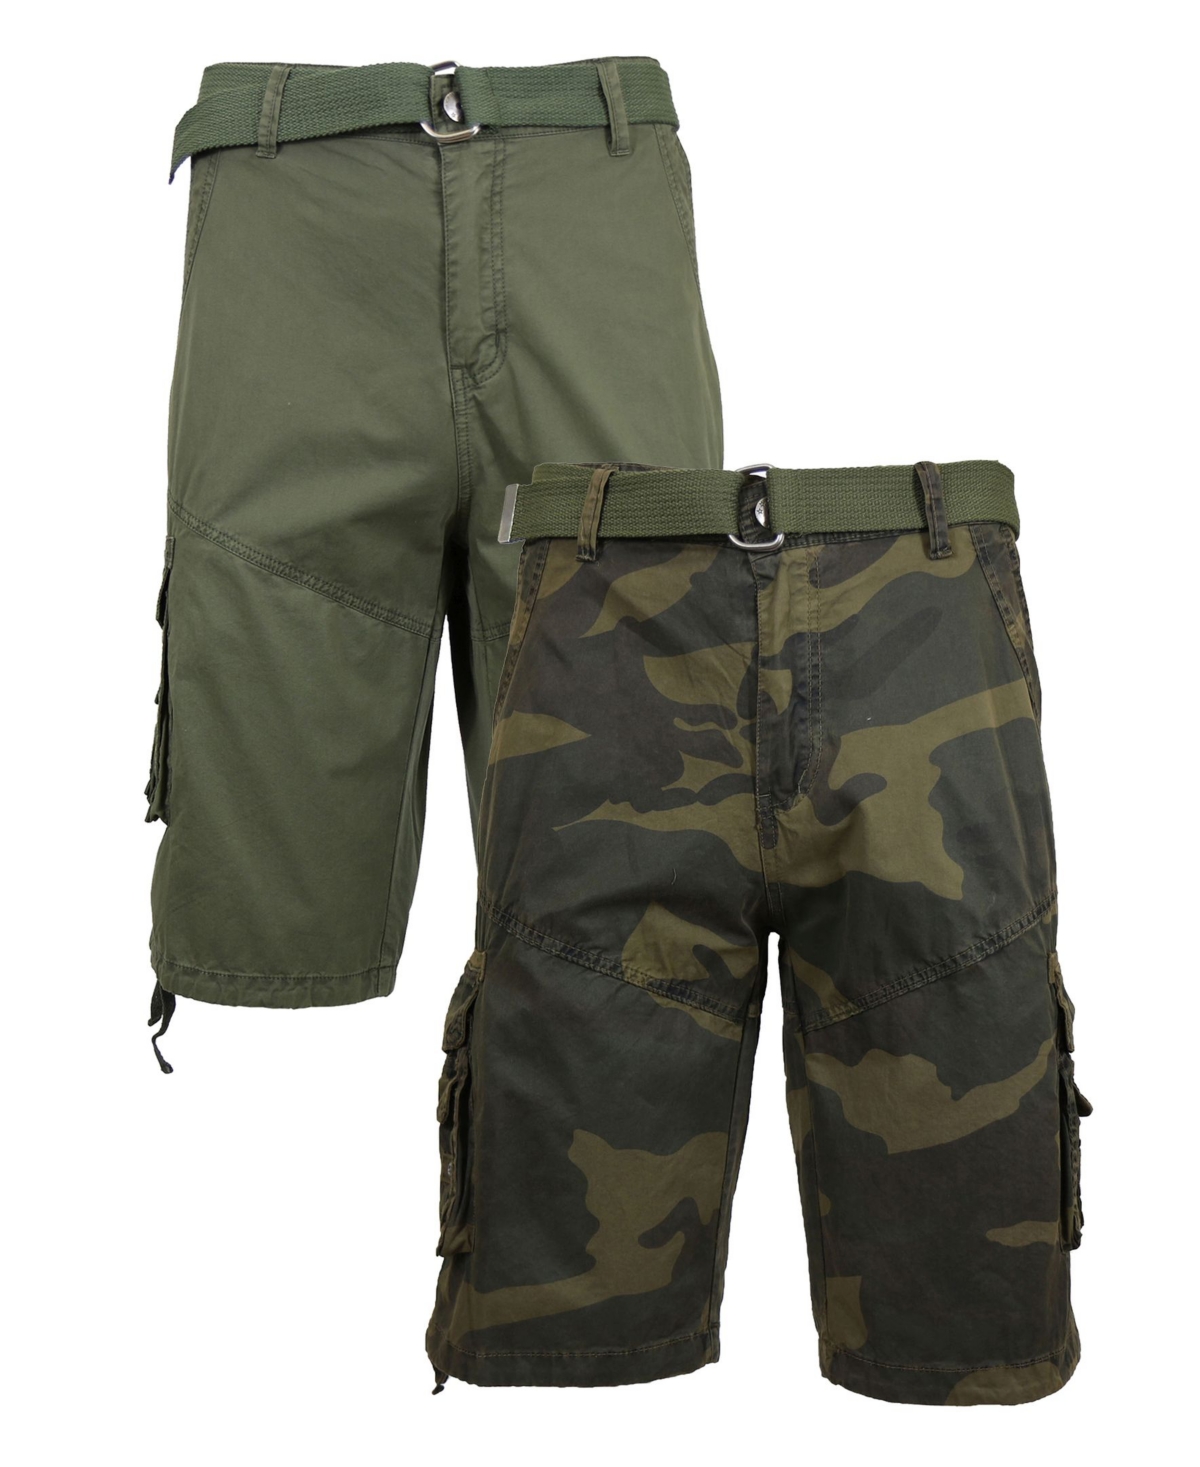 Men's Belted Cargo Shorts with Twill Flat Front Washed Utility Pockets, Pack of 2 - Olive and Woodland Camo